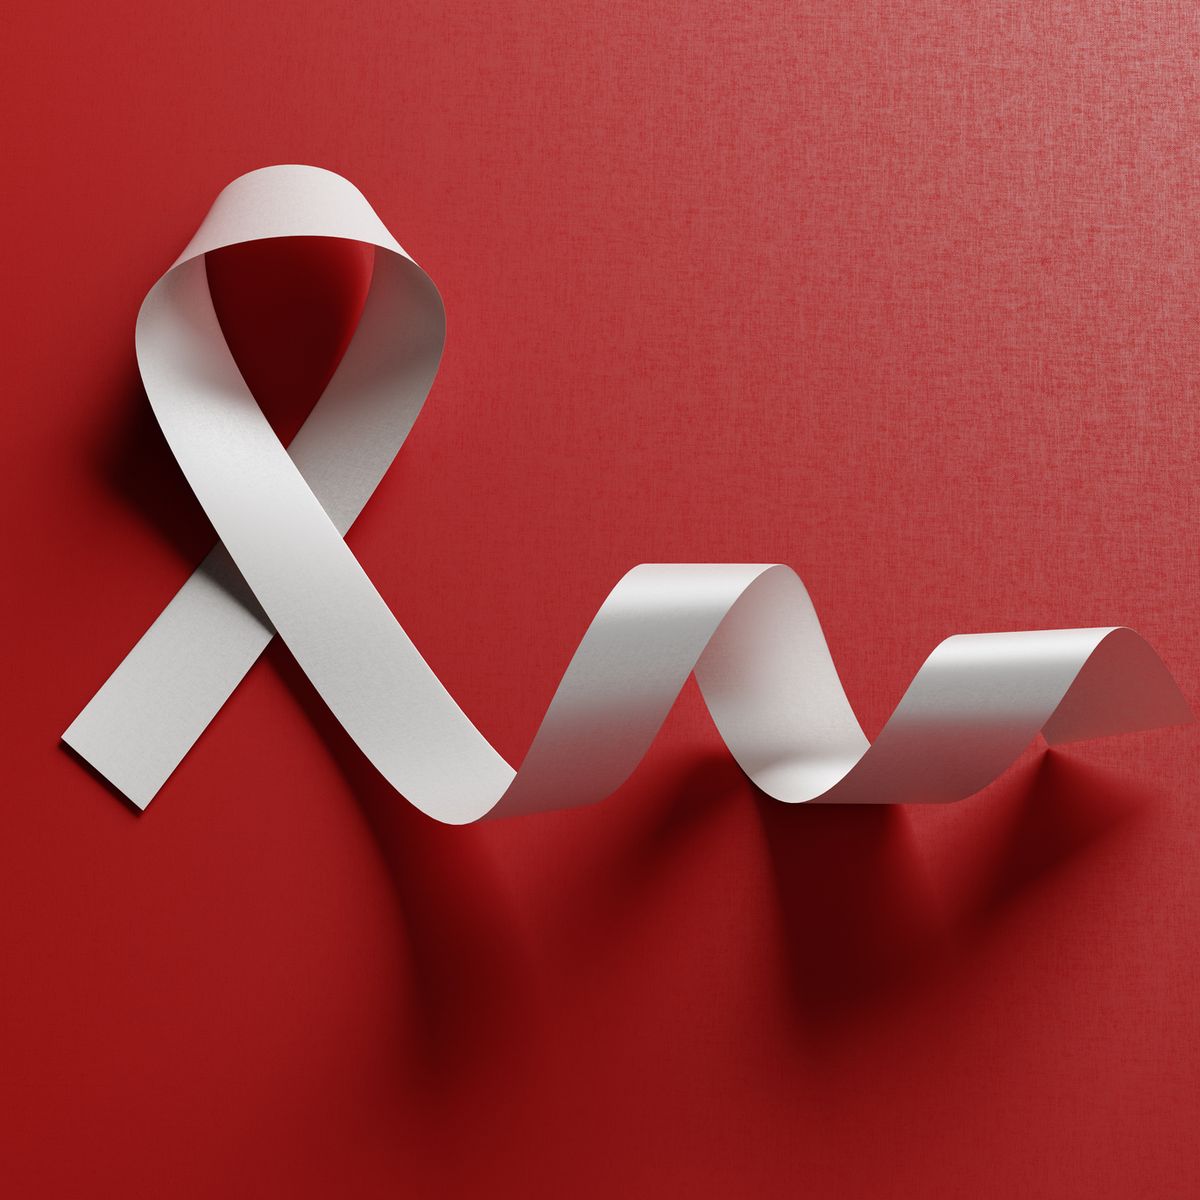 White Blindeness And Bone Cancer Awareness Ribbon On Red Background